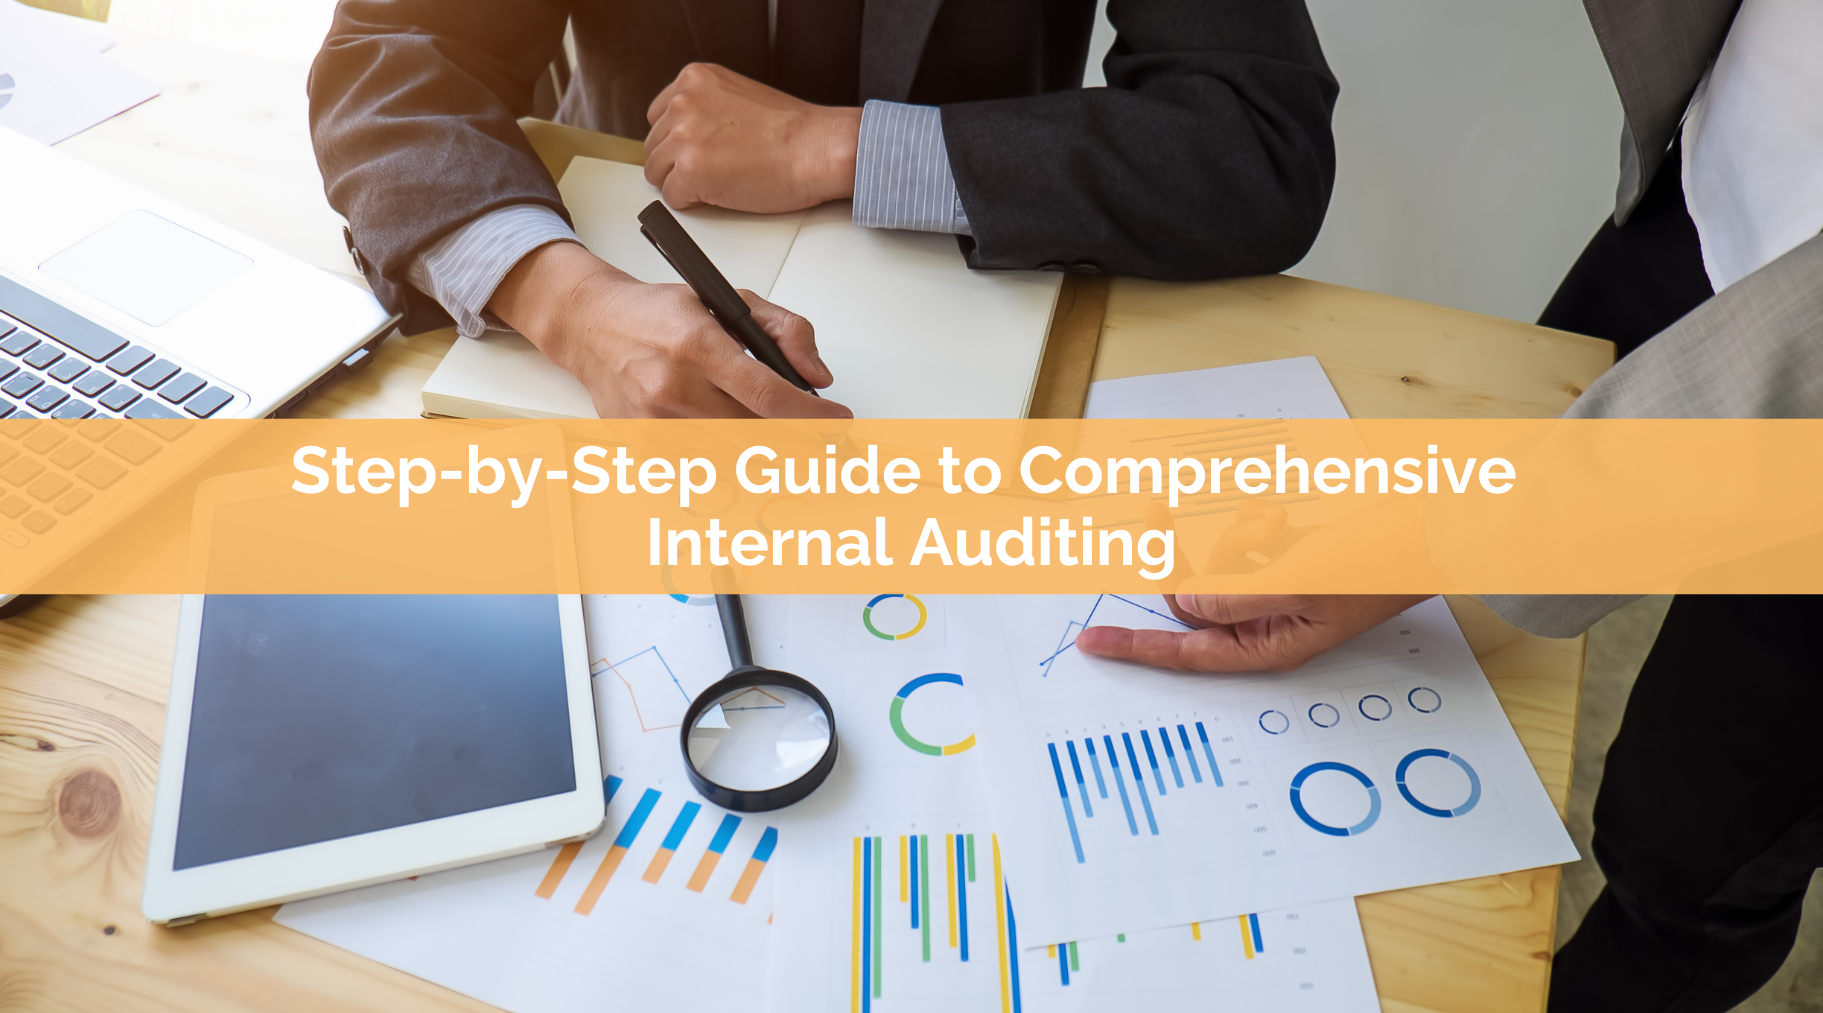 Step-by-Step Guide to Comprehensive Internal Auditing (2)